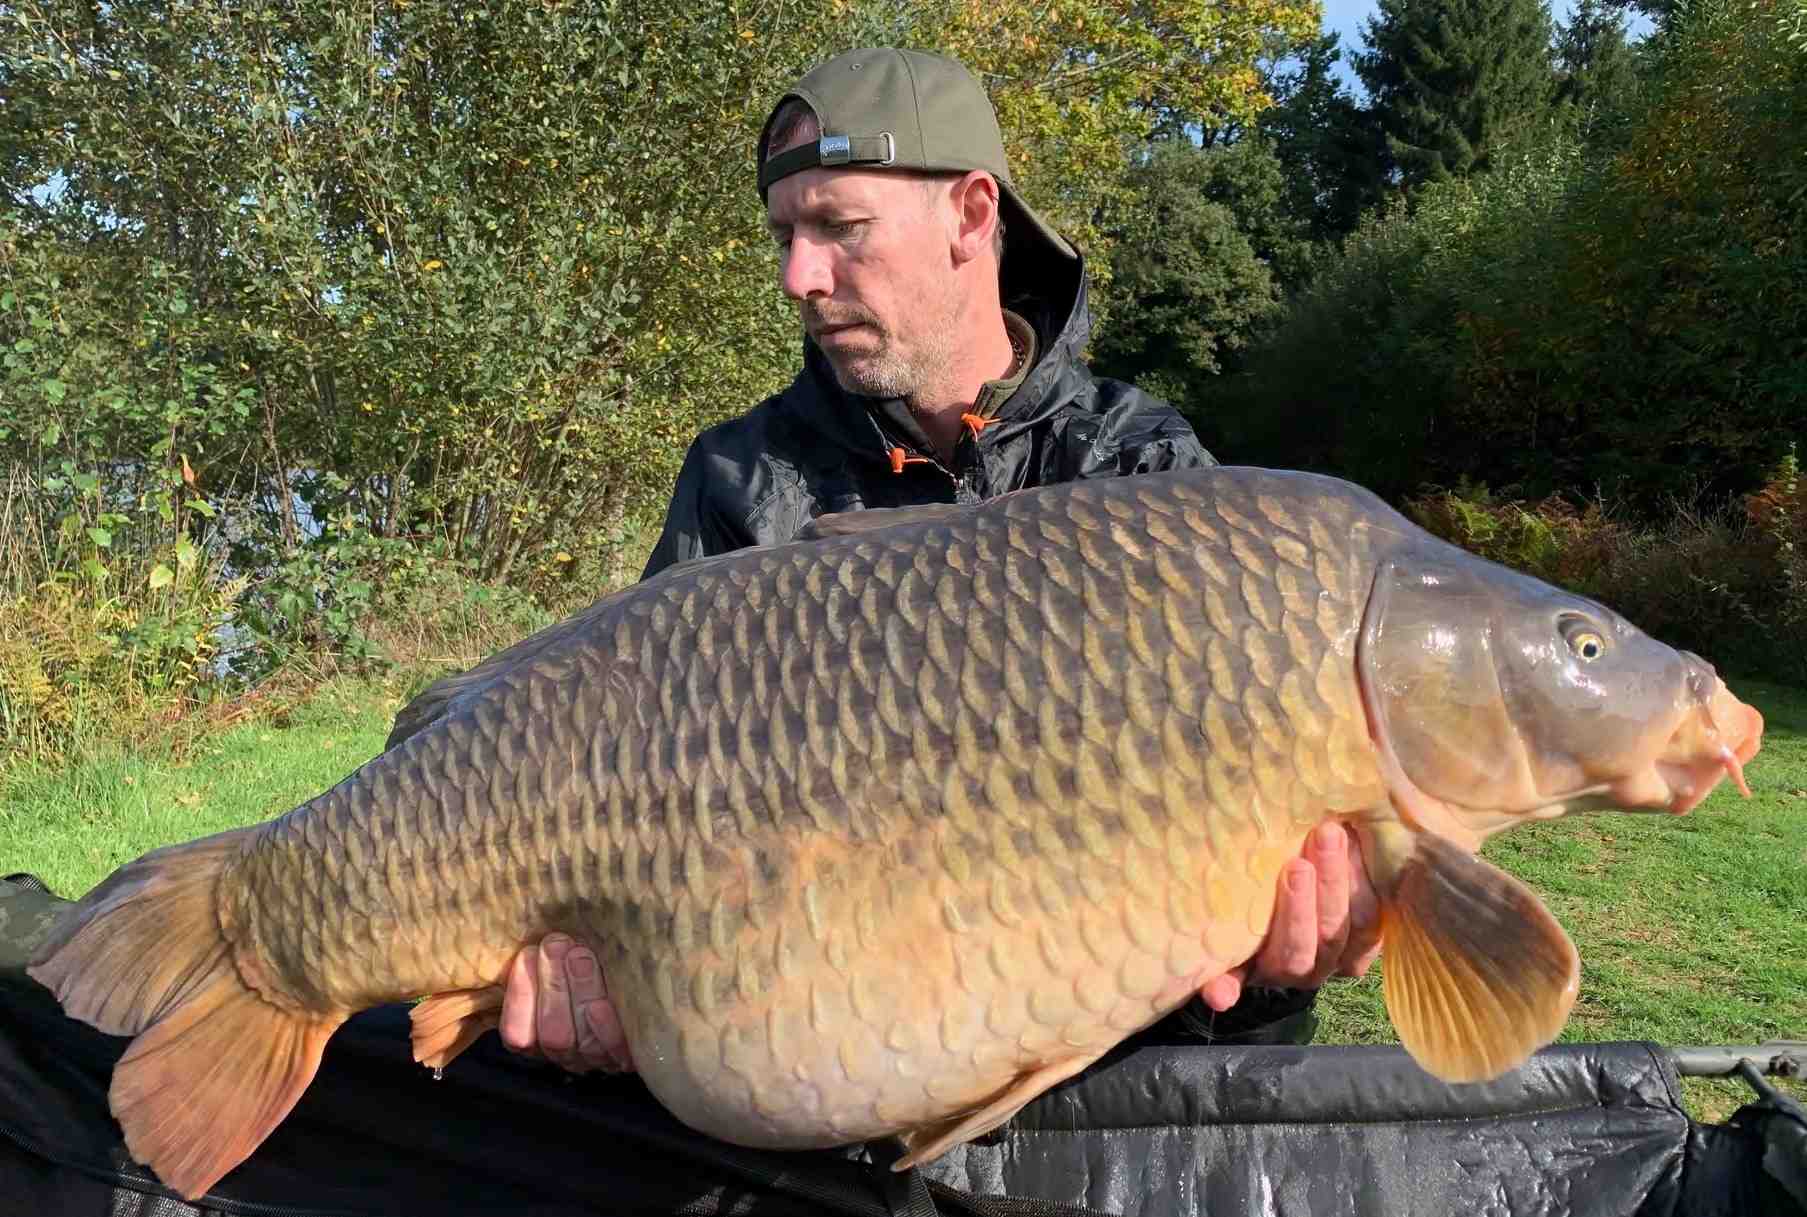 Carp fishing holidays with accommodation in France